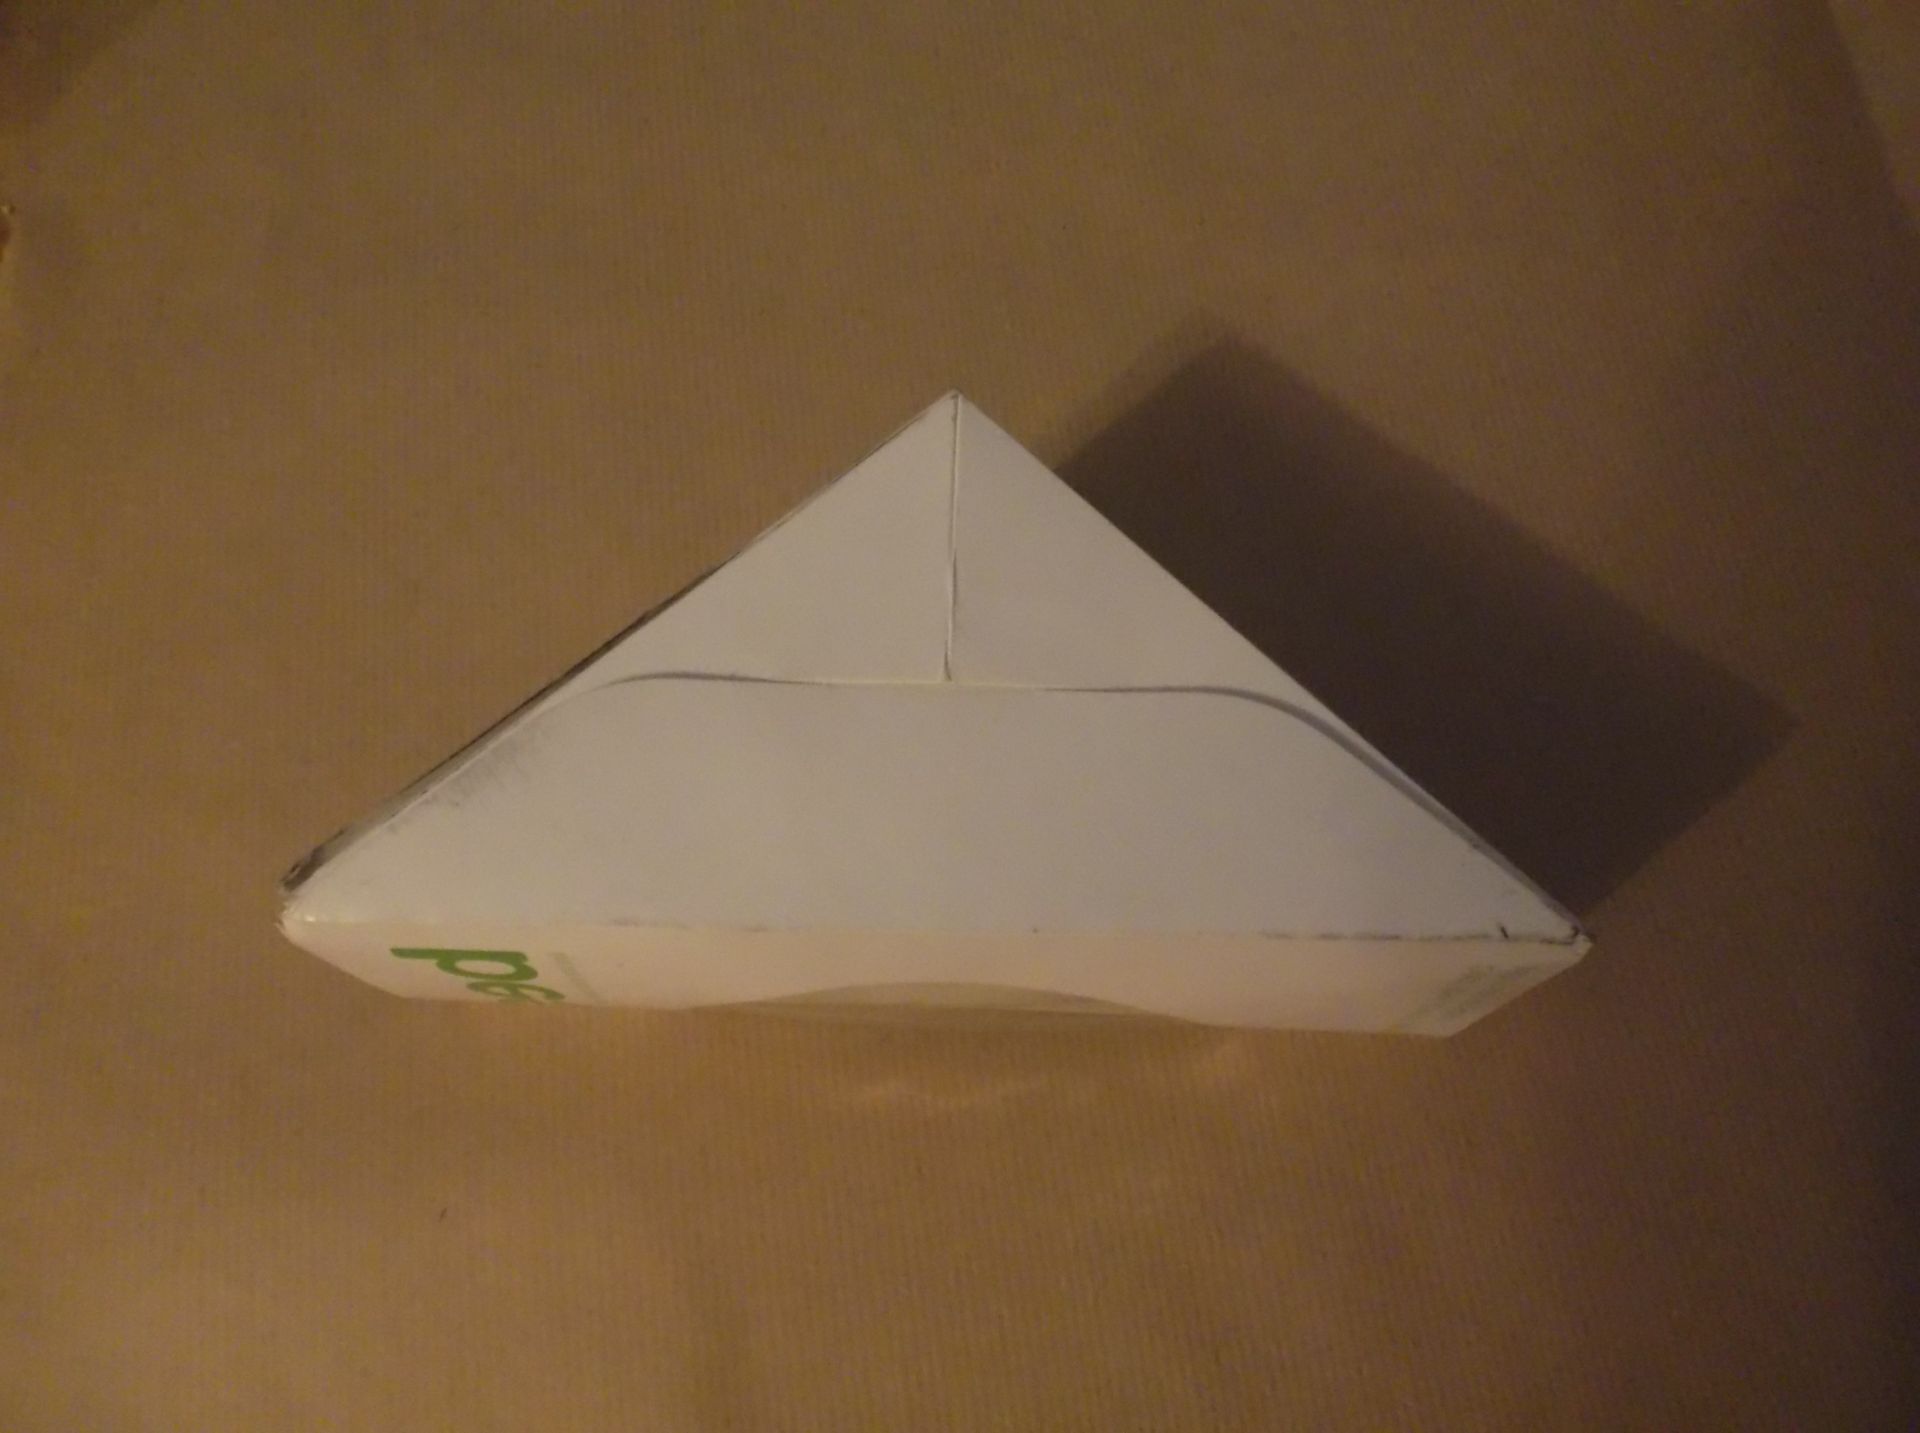 1 Bx Of 500 Eco Frendly Cardboard Sandwich Wedge - Image 5 of 6